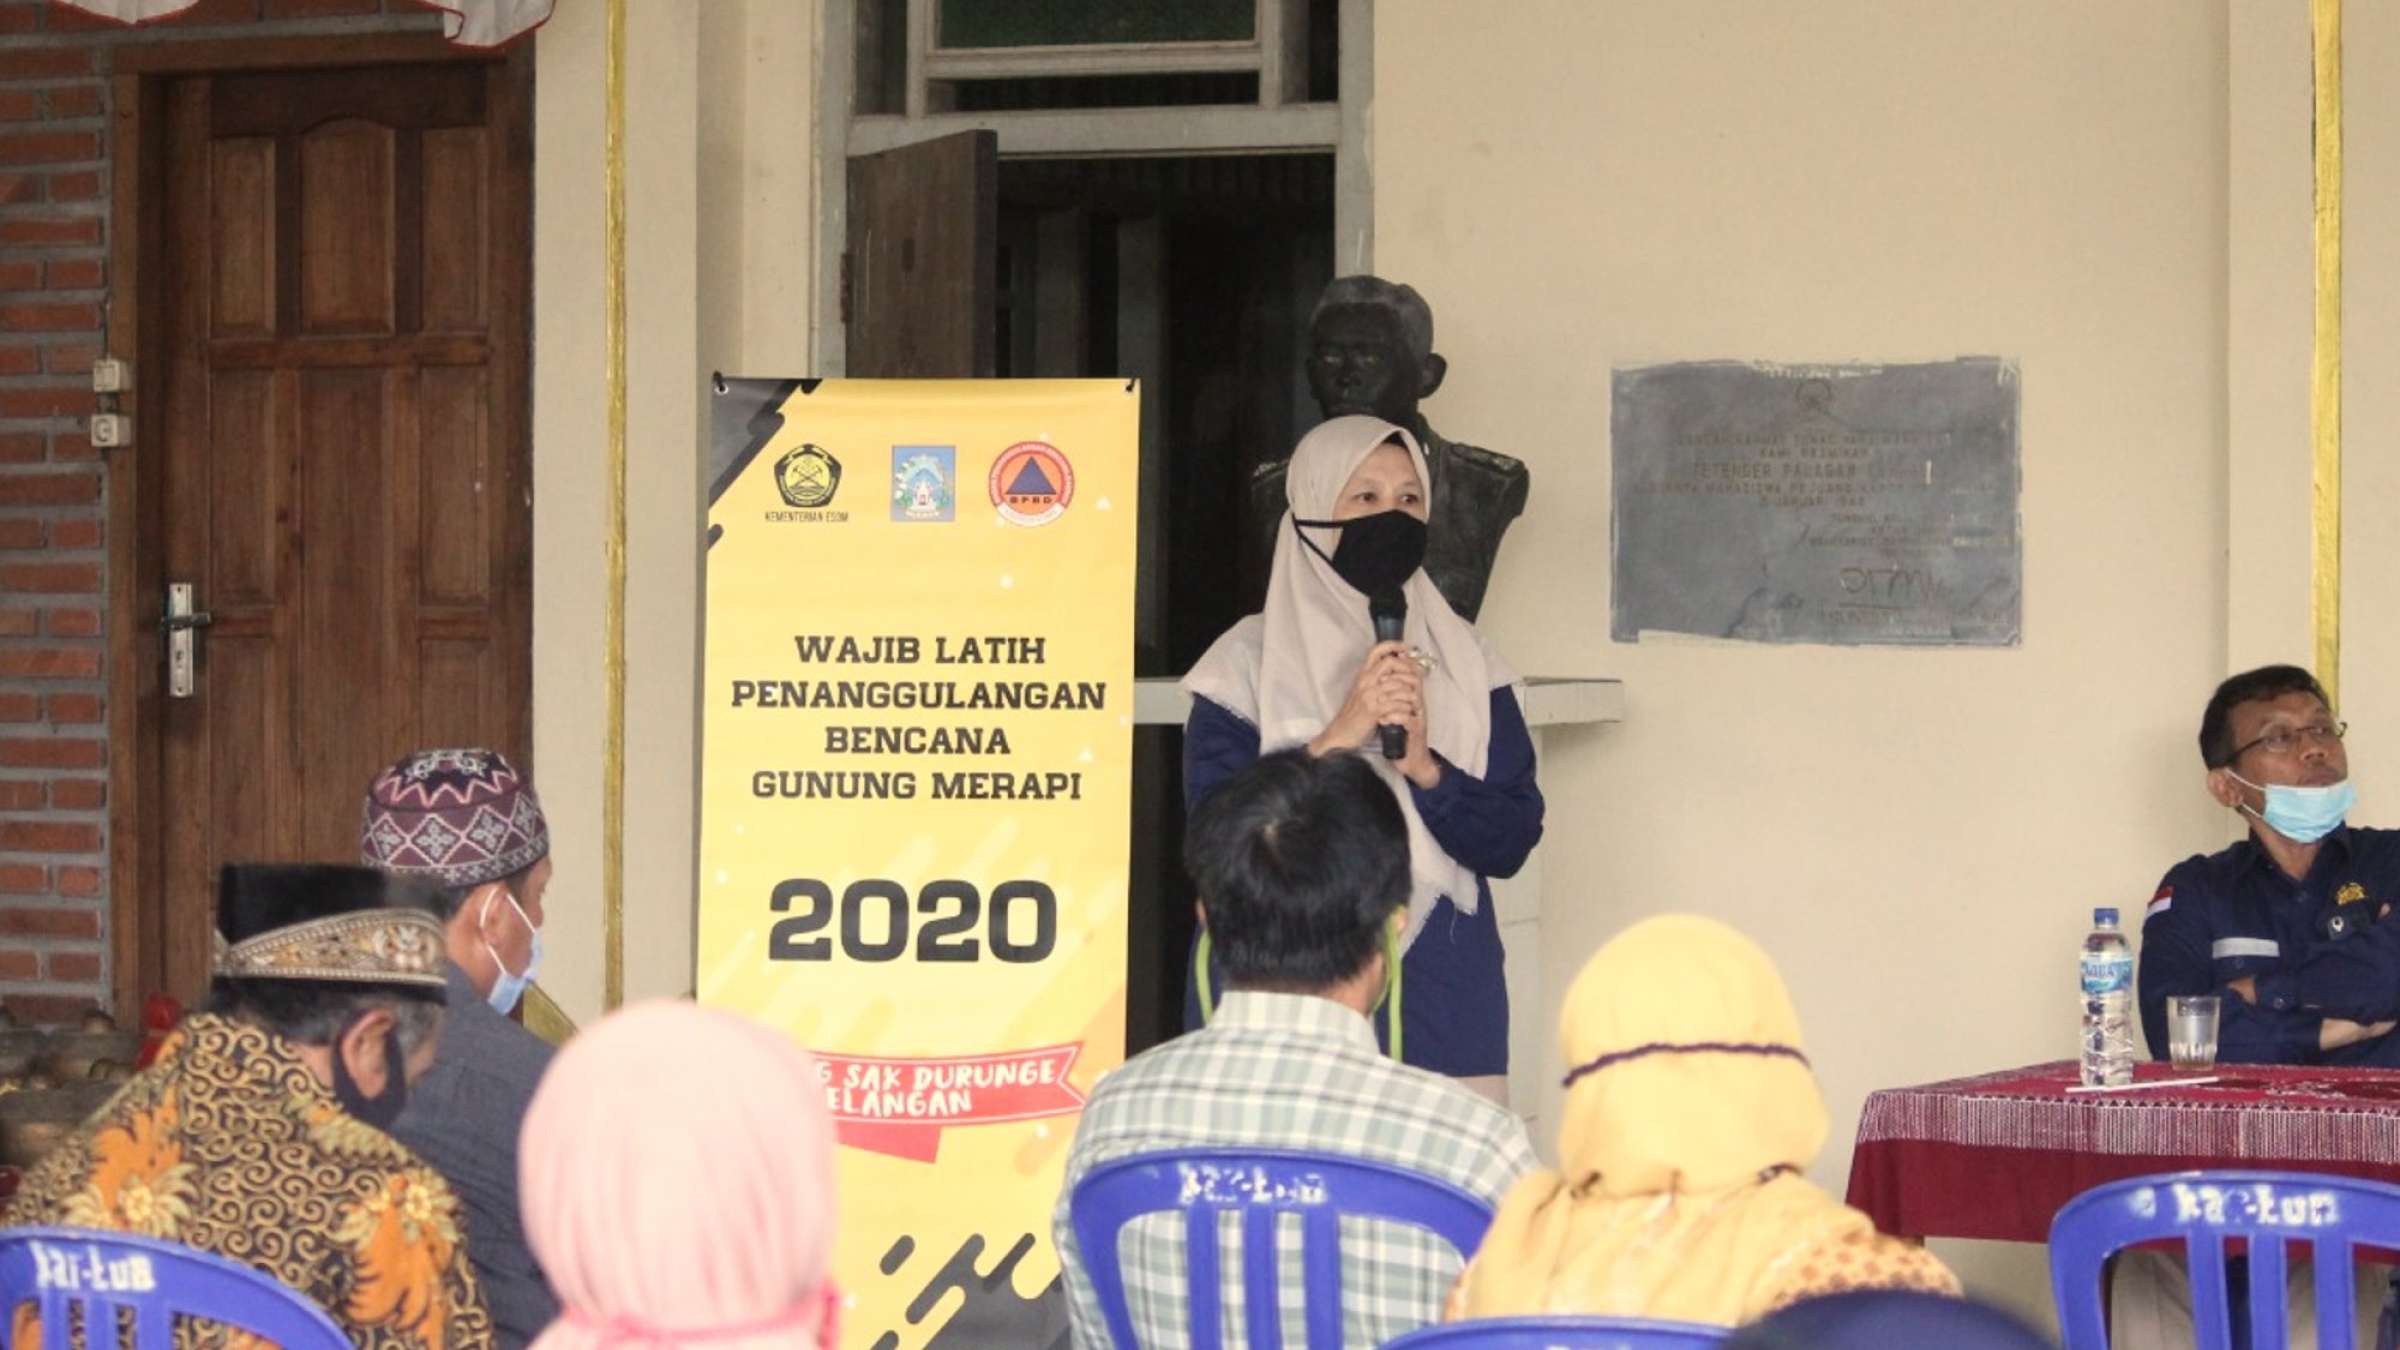 indonesian woman presents in front of a group